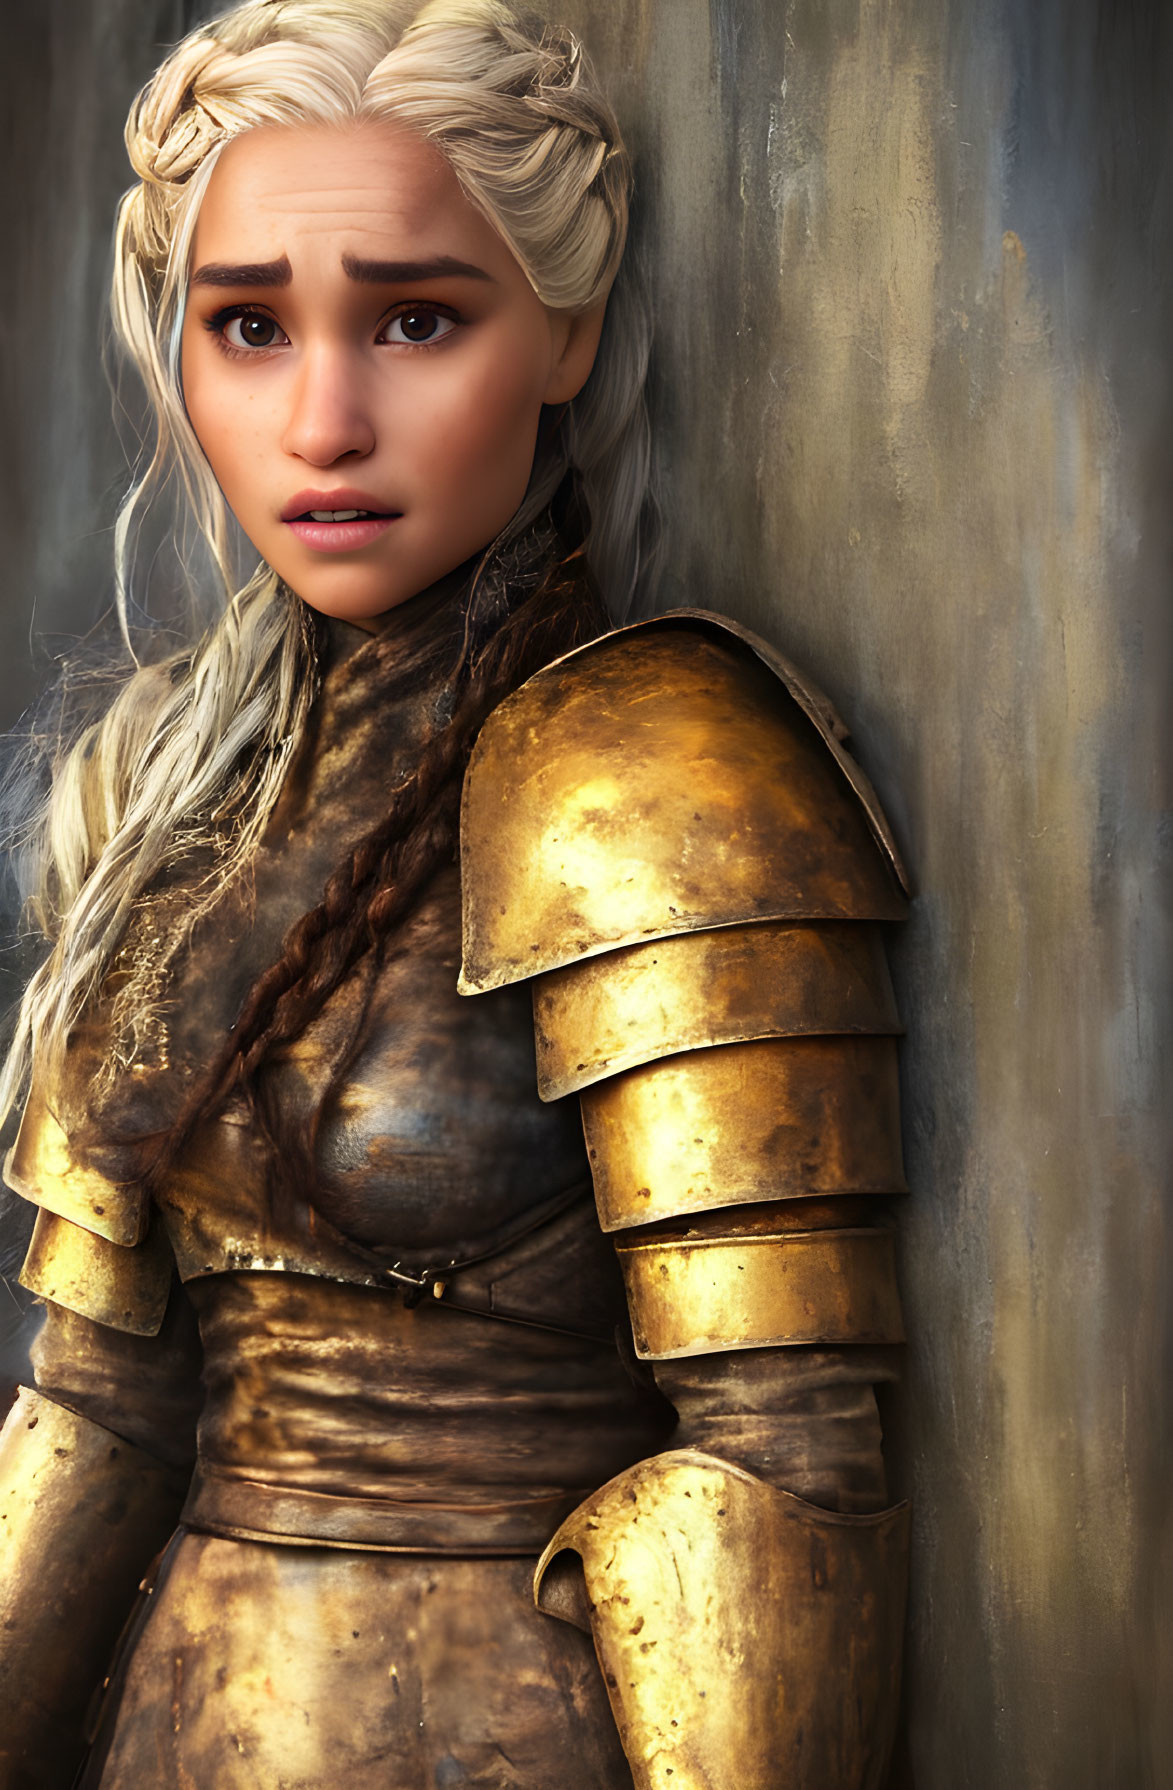 Blonde Braided Hair Female Character in Golden Armor against Textured Background